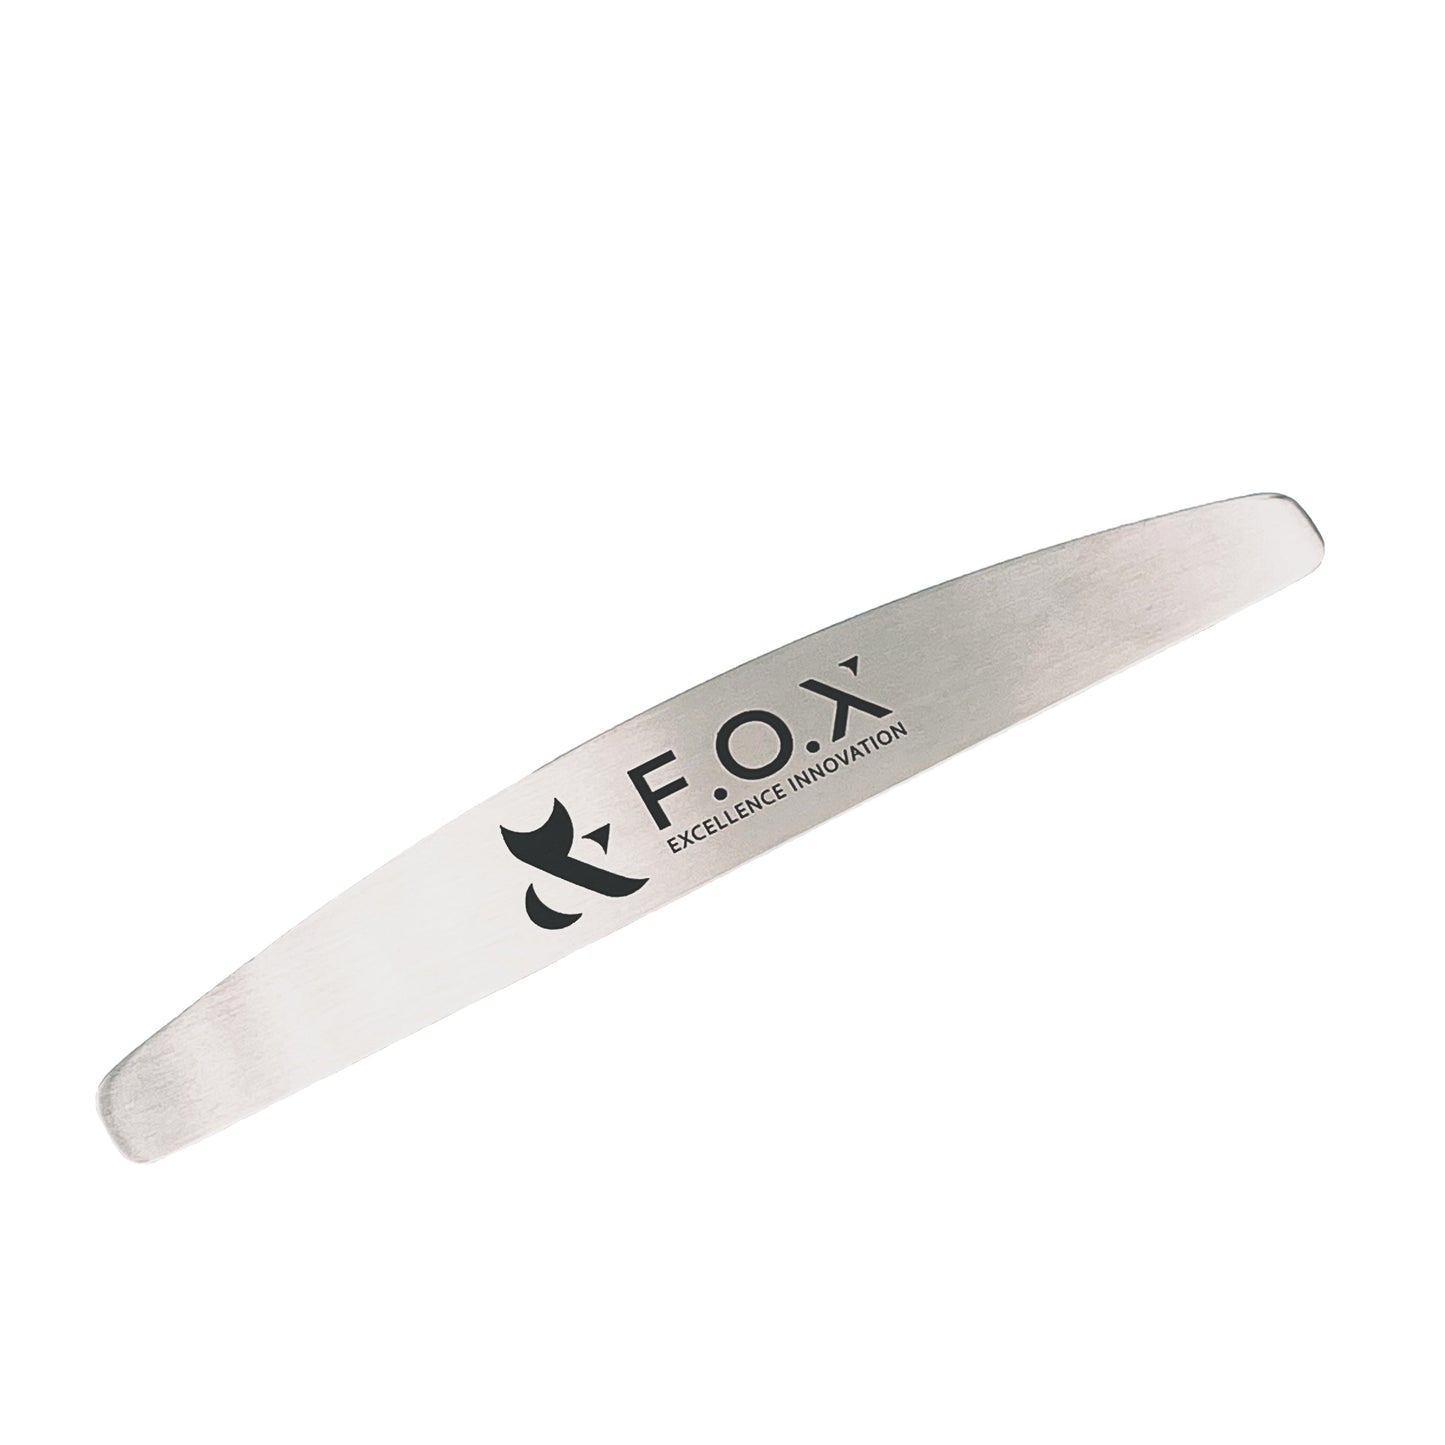 F.O.X Pro Metal Bases for nail files and buffs (abrasive not included) - F.O.X Nails USA